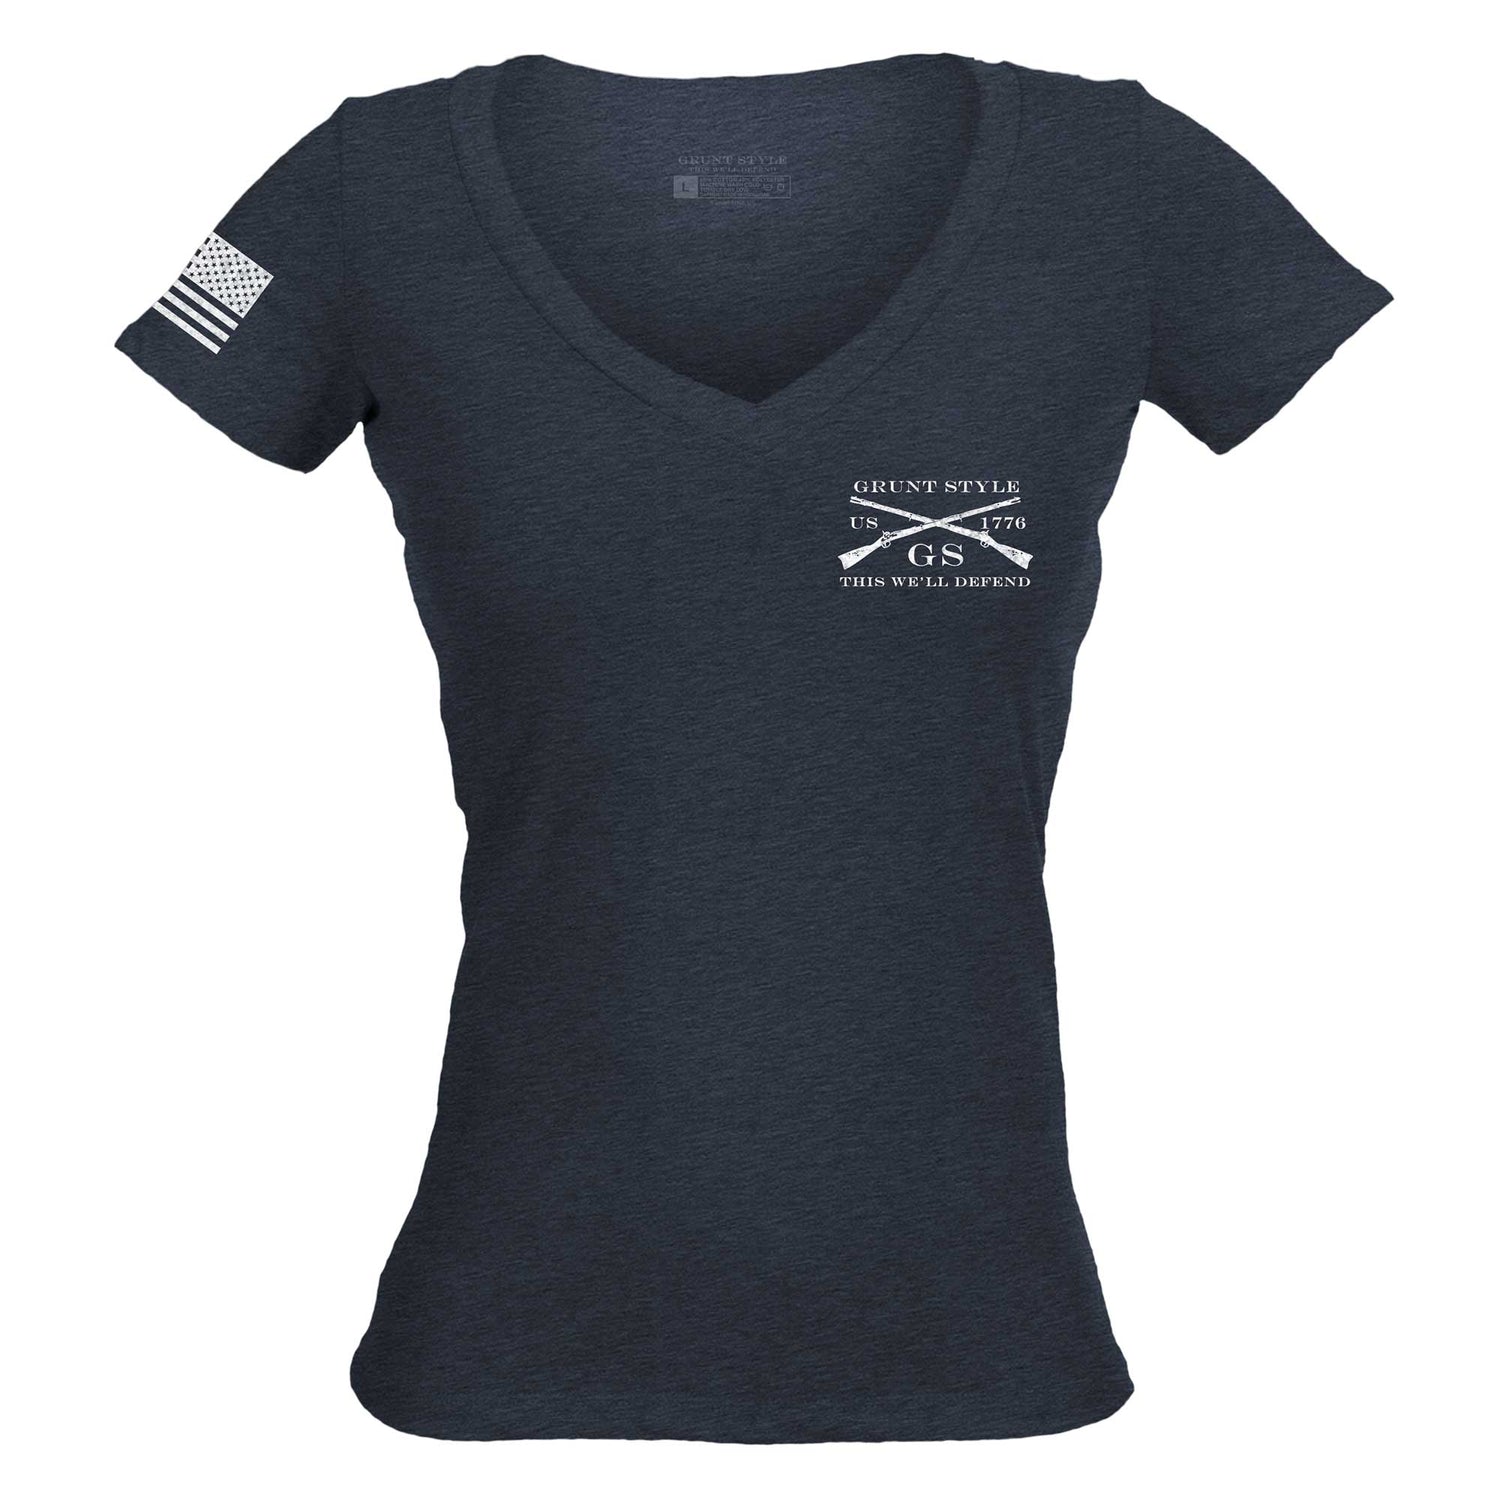 Patriotic Tops for Women - Stars and Stripes Grunt Style Logo 